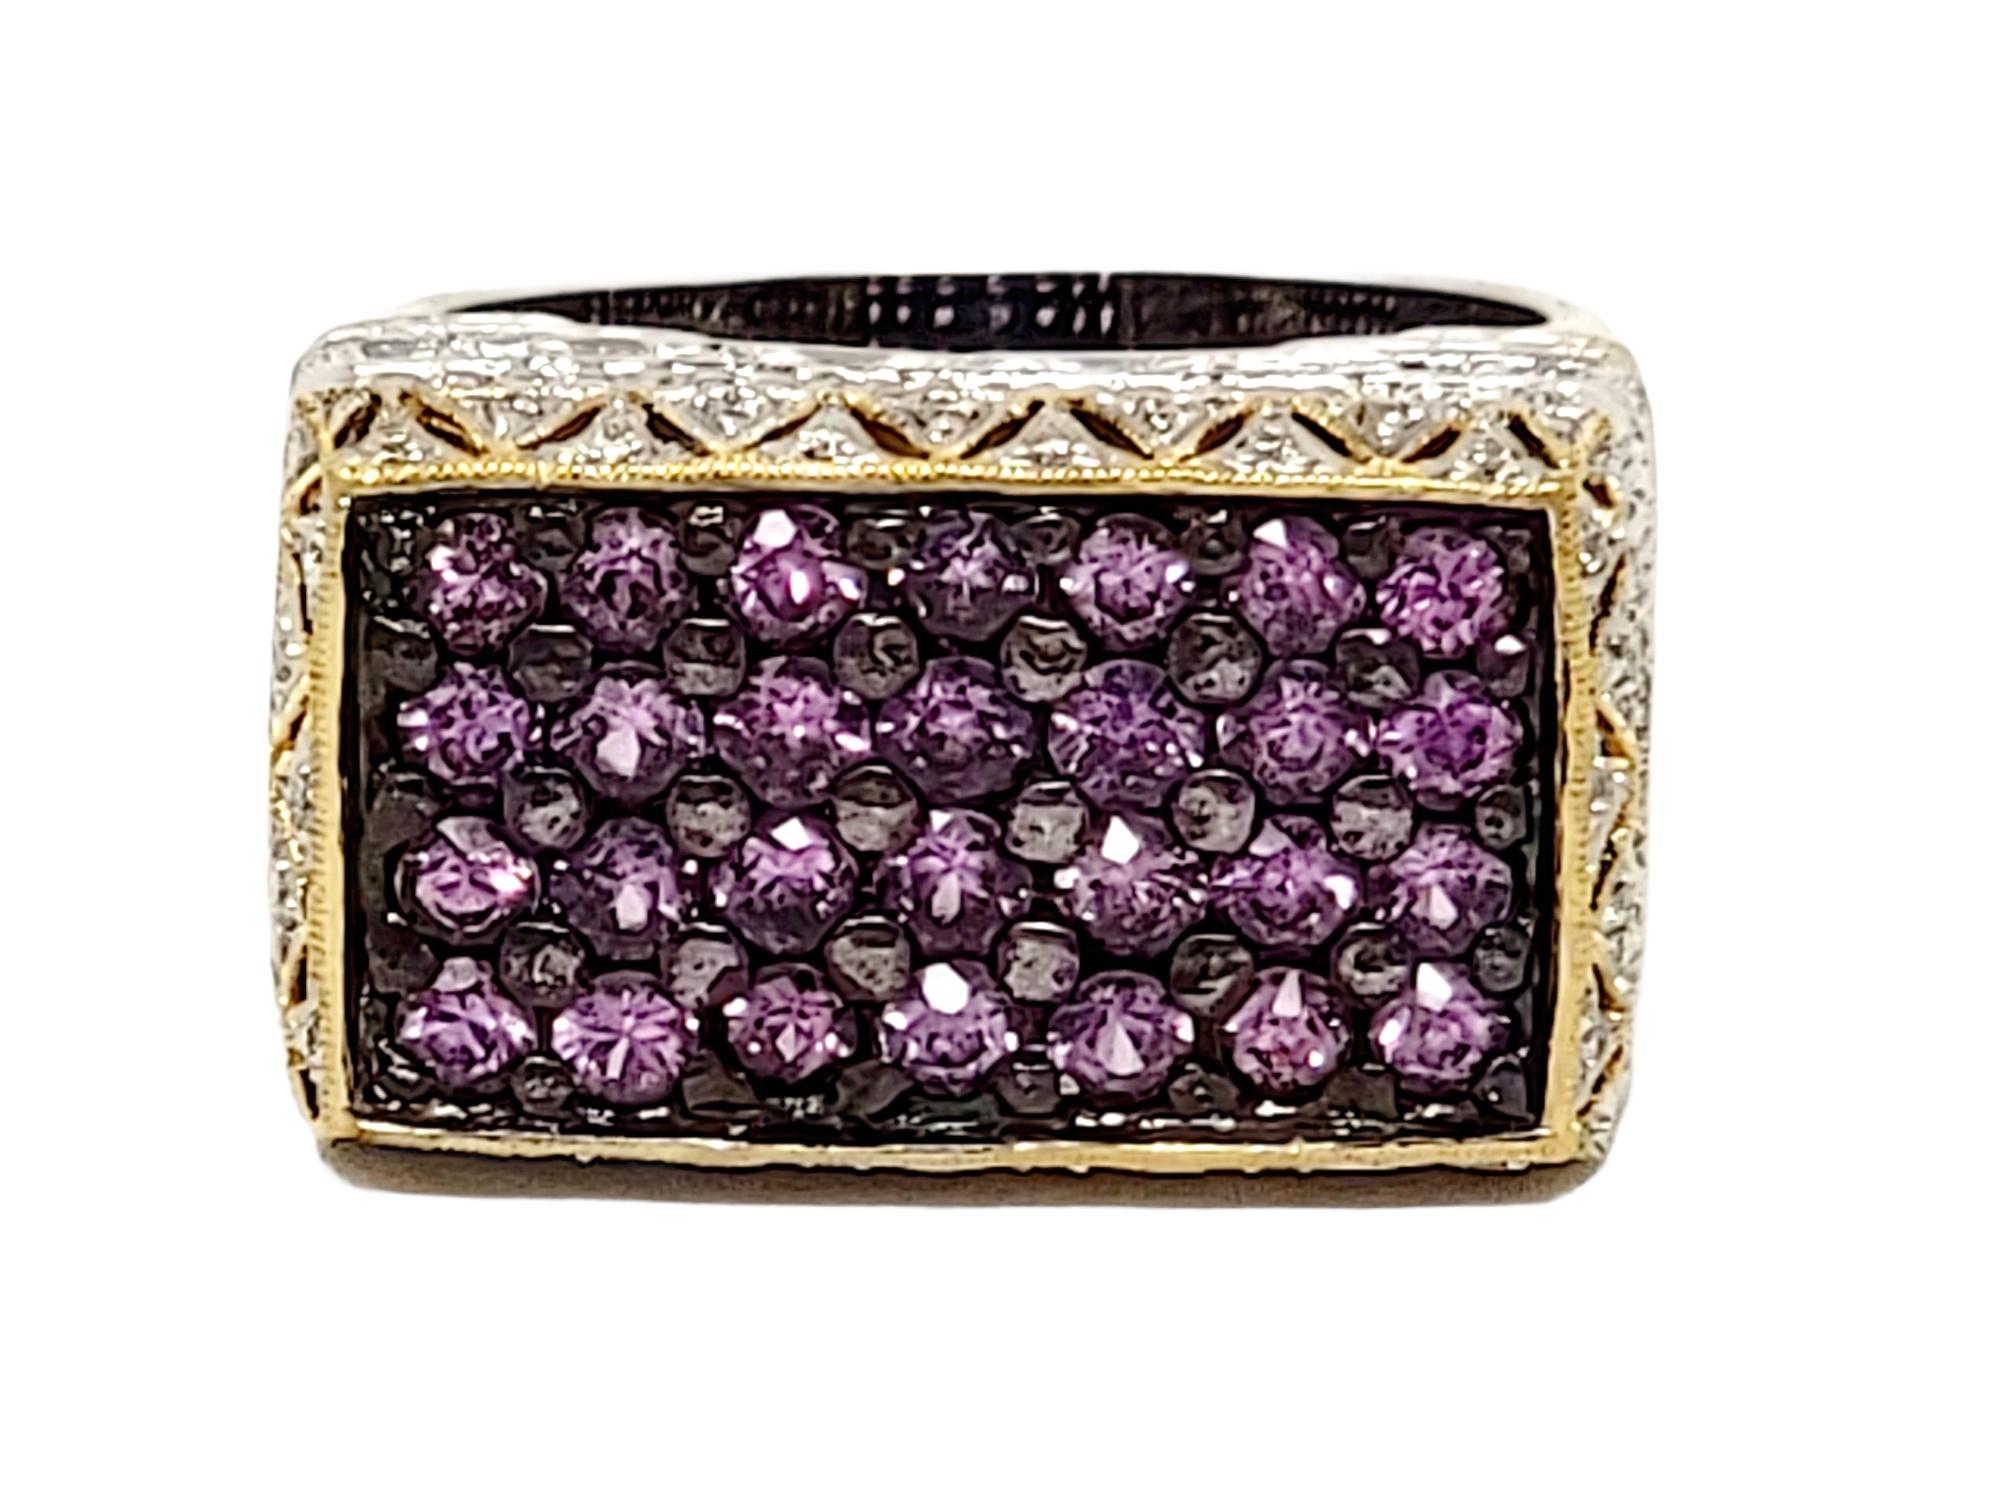 Ring size: 7.25

Contemporary Le Vian pink sapphire and pave diamond ring with intricate two-tone gold detail. 

Ring size: 7.25
Weight: 13.10 grams
Metal: 18 Karat Yellow and White Gold
Natural Diamonds: .15 ctw 
Diamond cut: Round